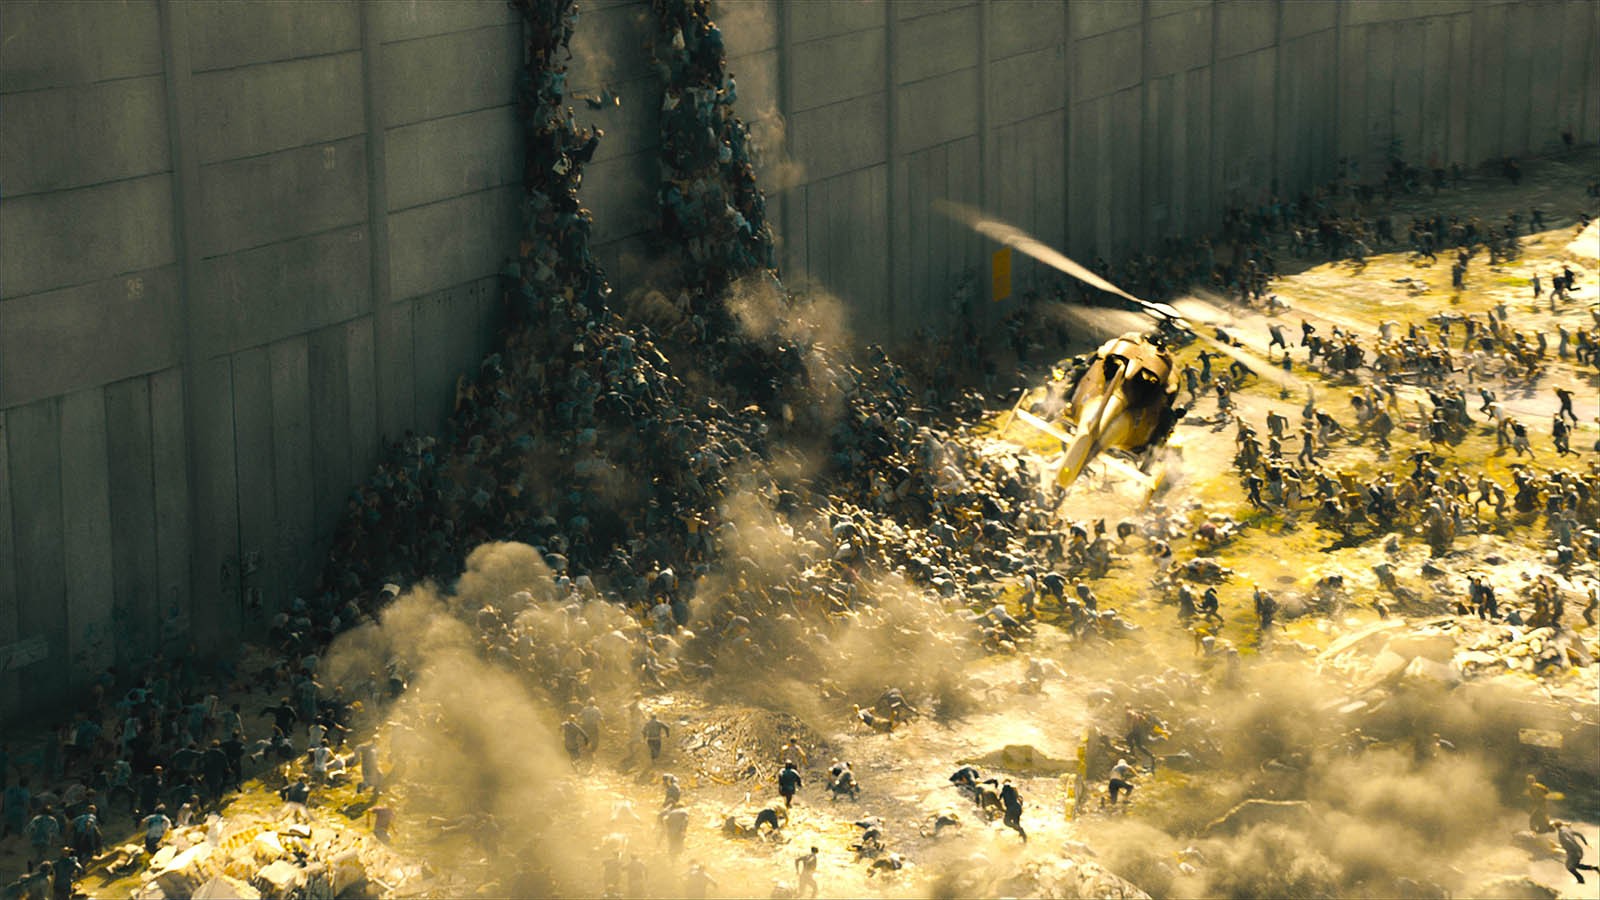 A scene from Paramount Pictures' World War Z (2013)